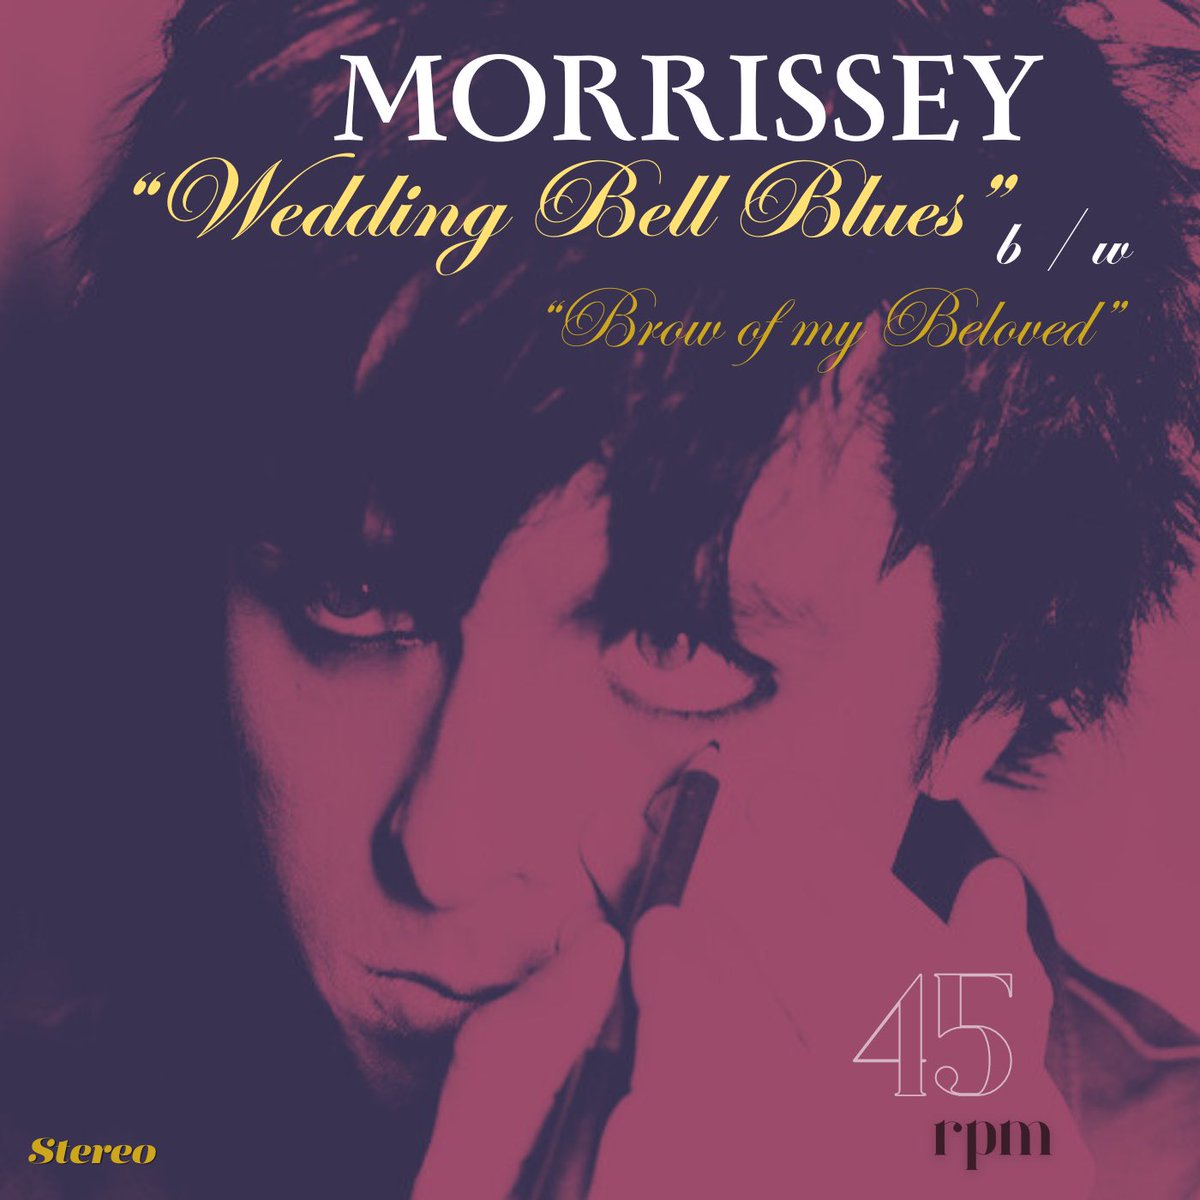 Wedding Bell Blues.

Design by me.

#morrissey #thesmiths #californiason #billiejoearmstrong #greenday #indiesleaze #indie #alternative #rock #graphicdesign #morrisseycentral